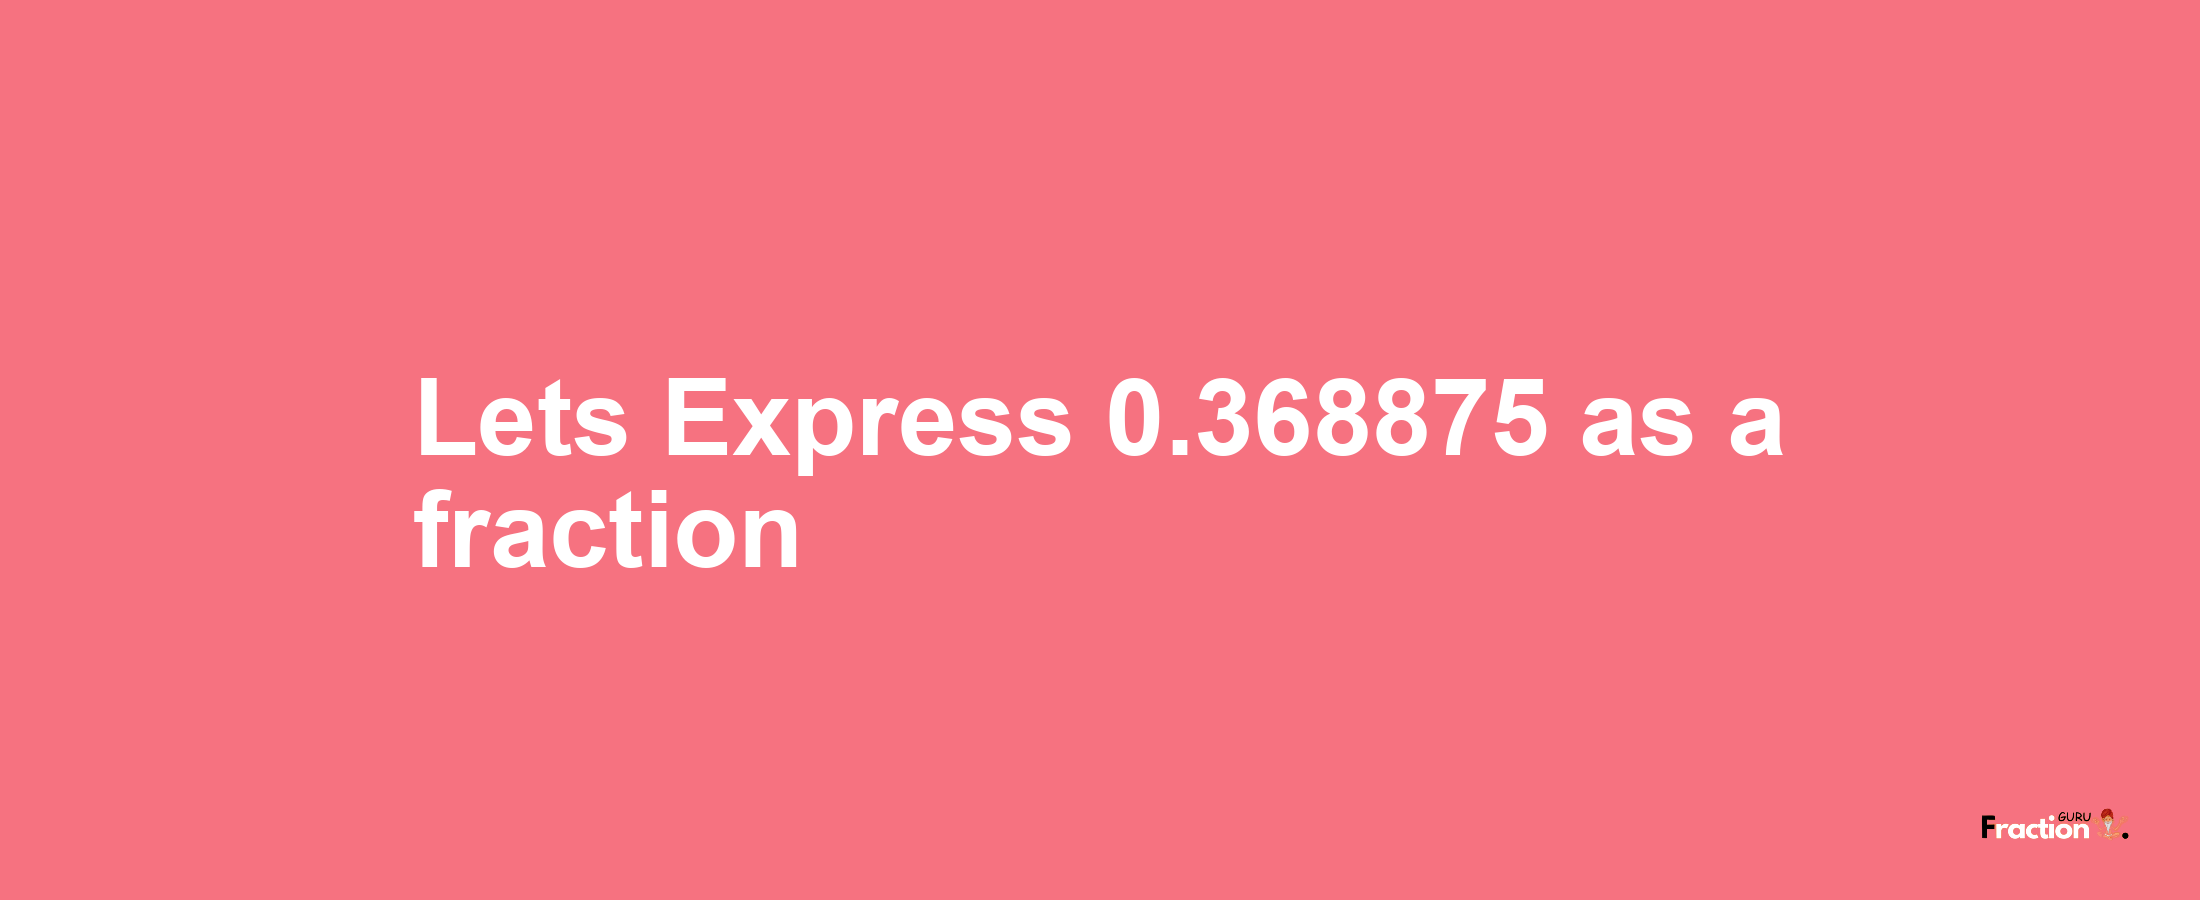 Lets Express 0.368875 as afraction